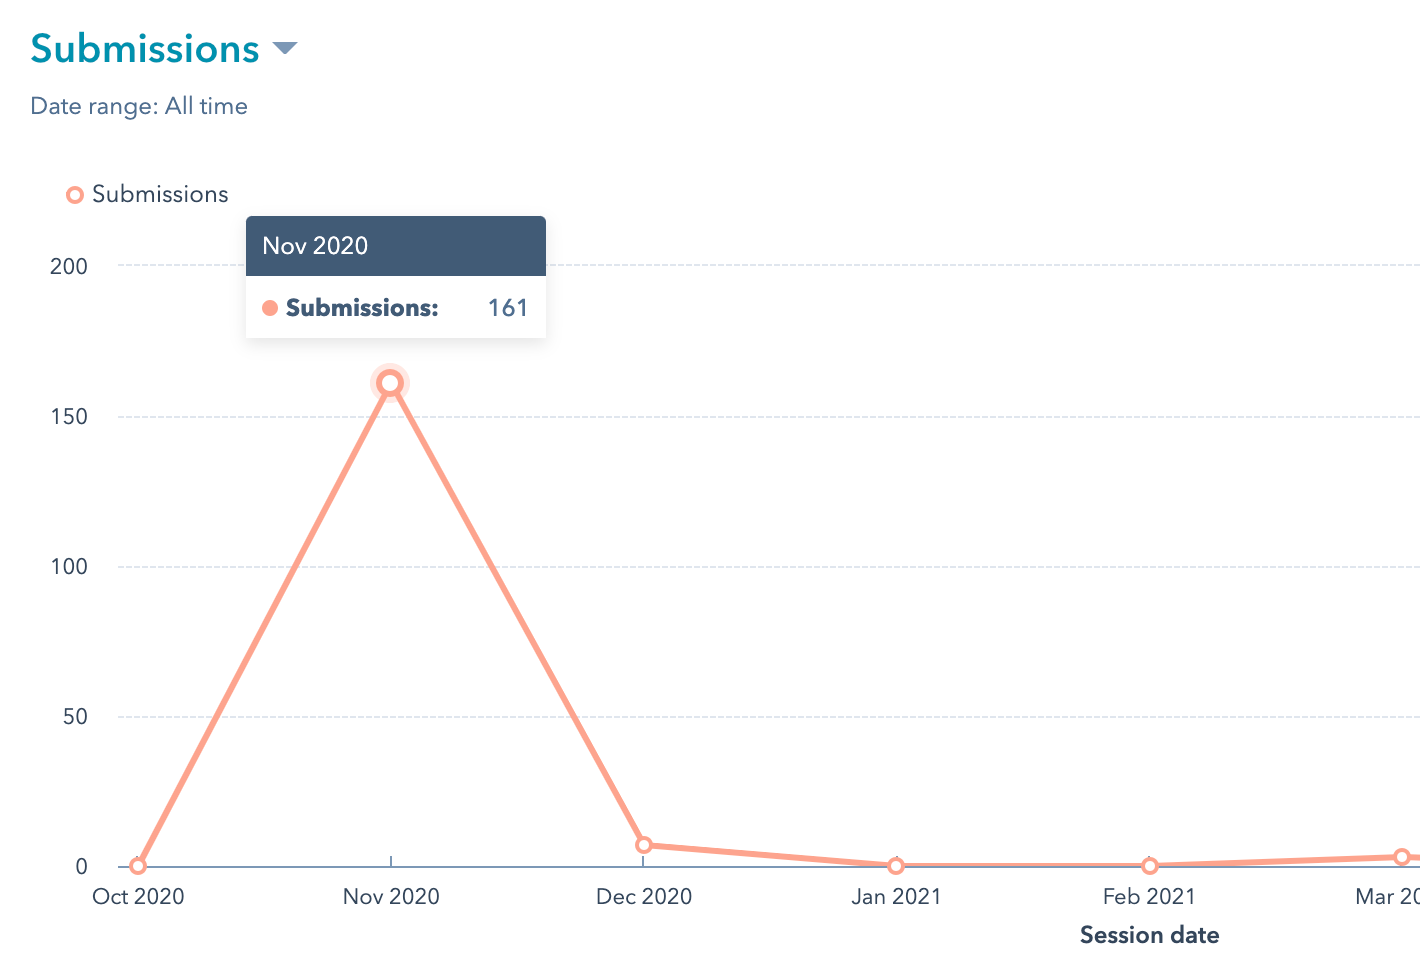 7 Lessons learned from scaling a content machine at Crossbeam in 18 months